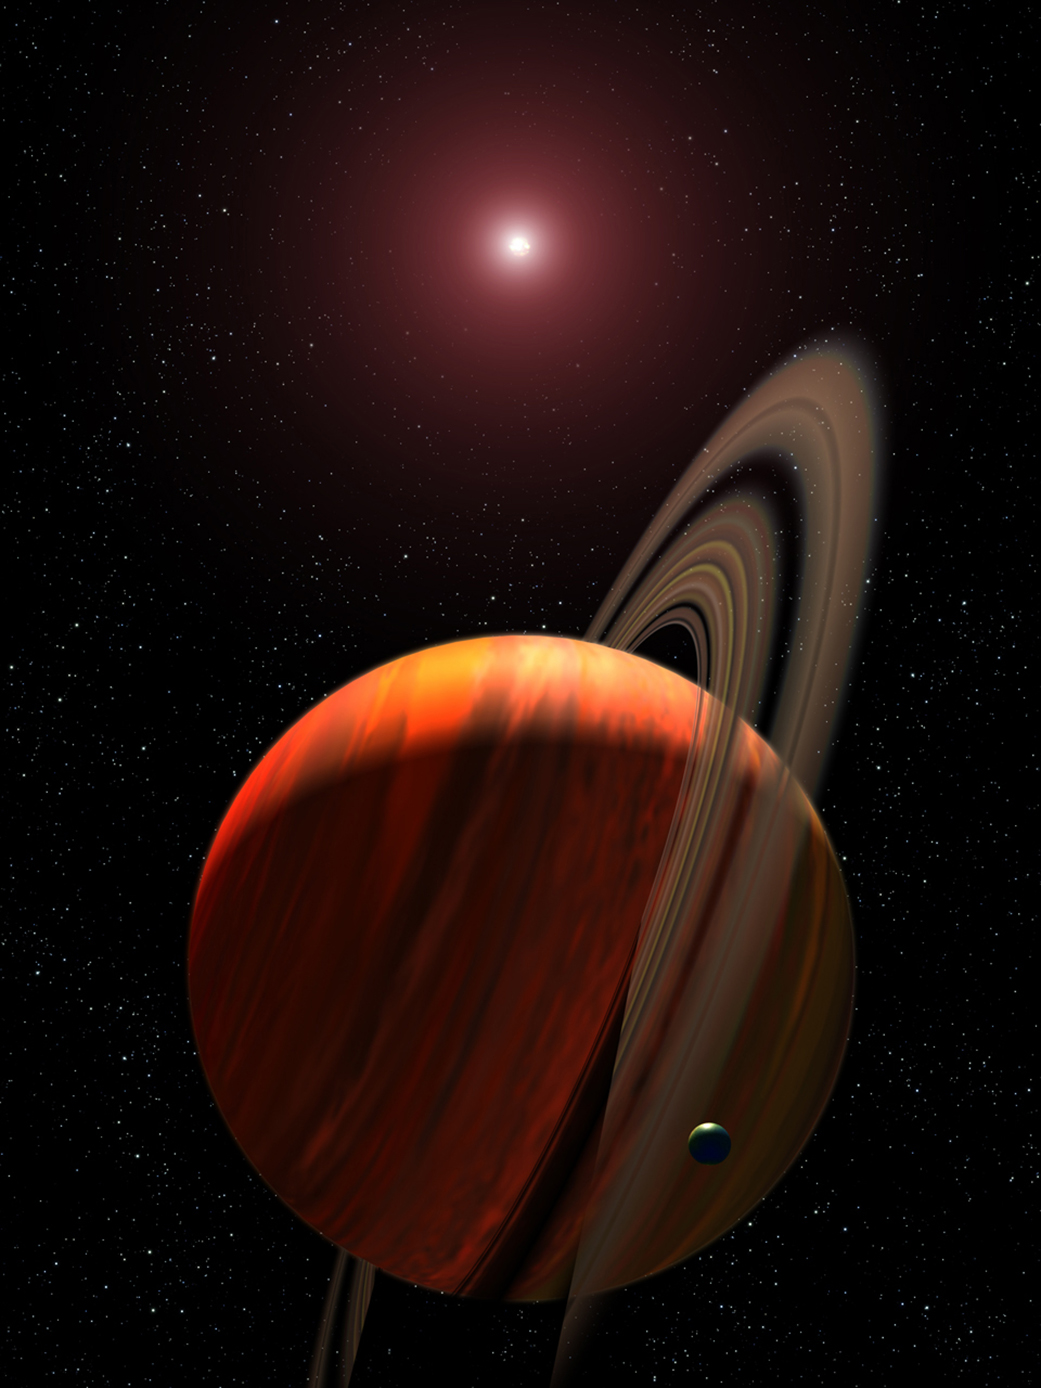 Artist's concept of a giant planet in space with a red dwarf star beyond it